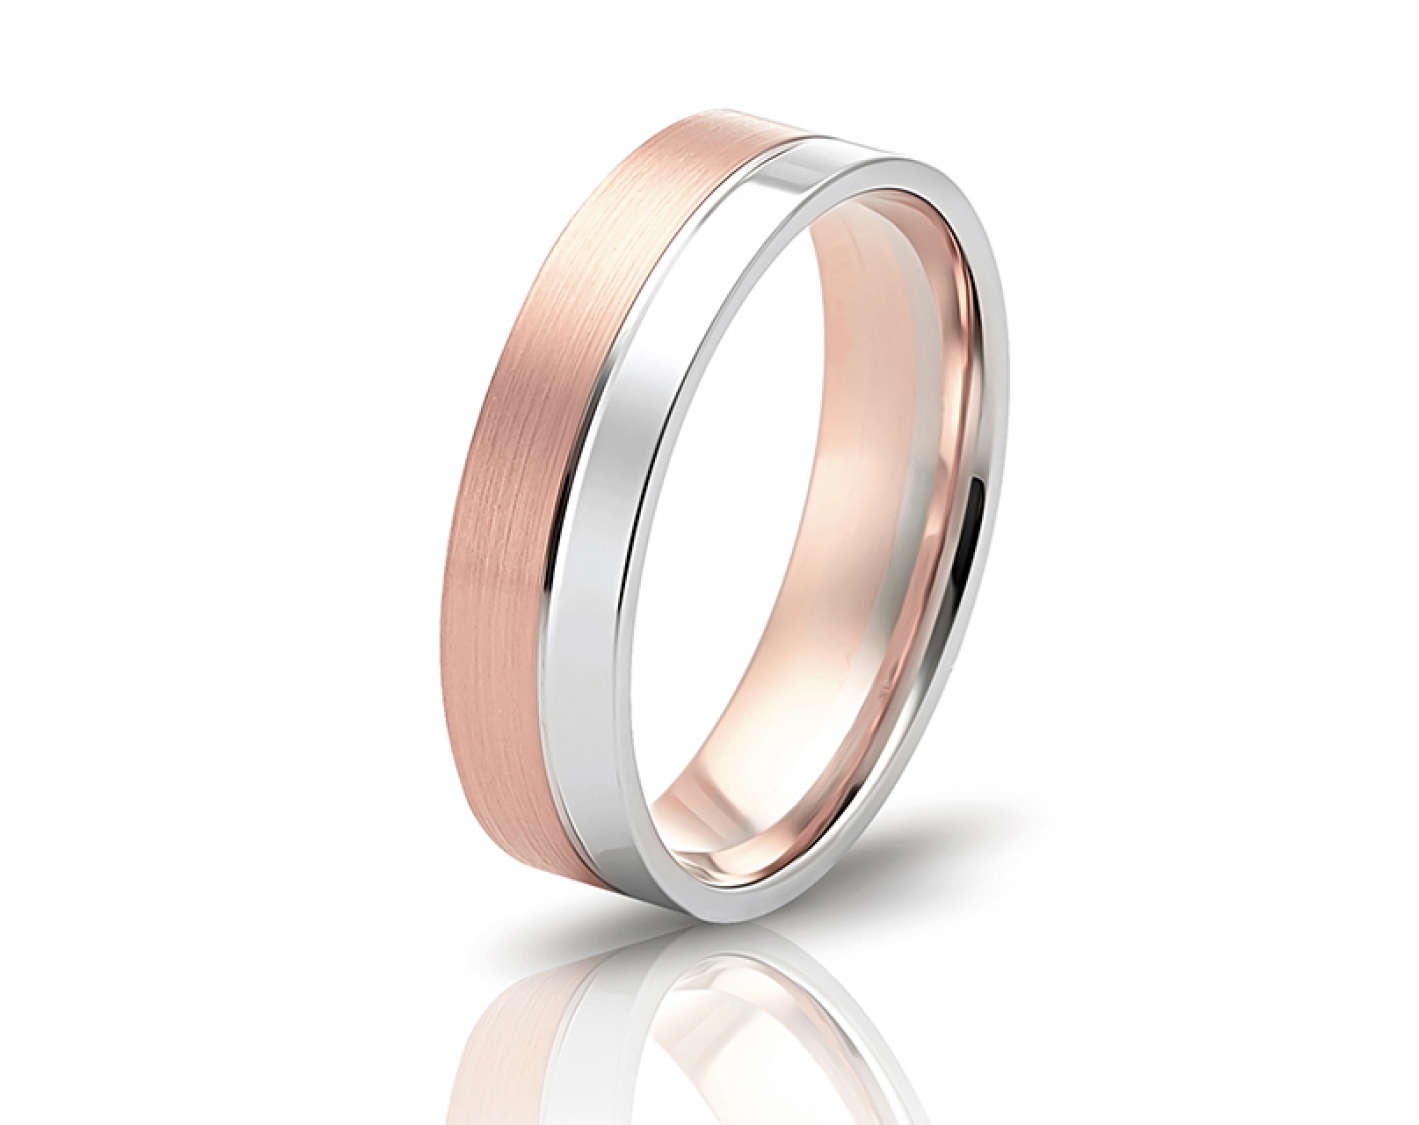 dual-tone 6mm two-toned* wedding band in matte & shiny finish